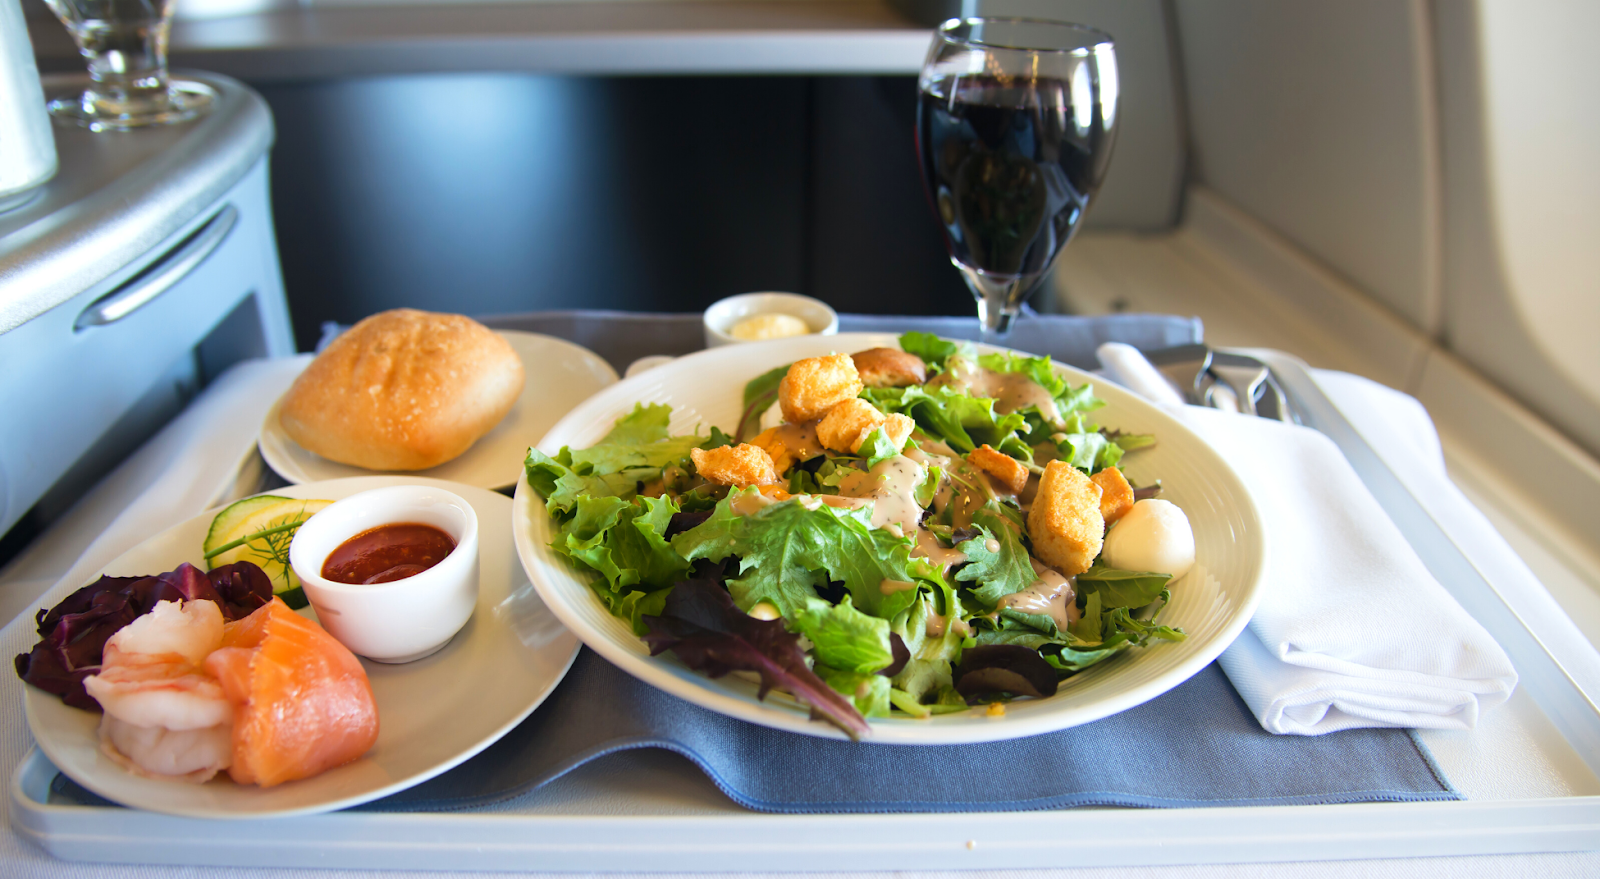 business class meal with salad and shrimp